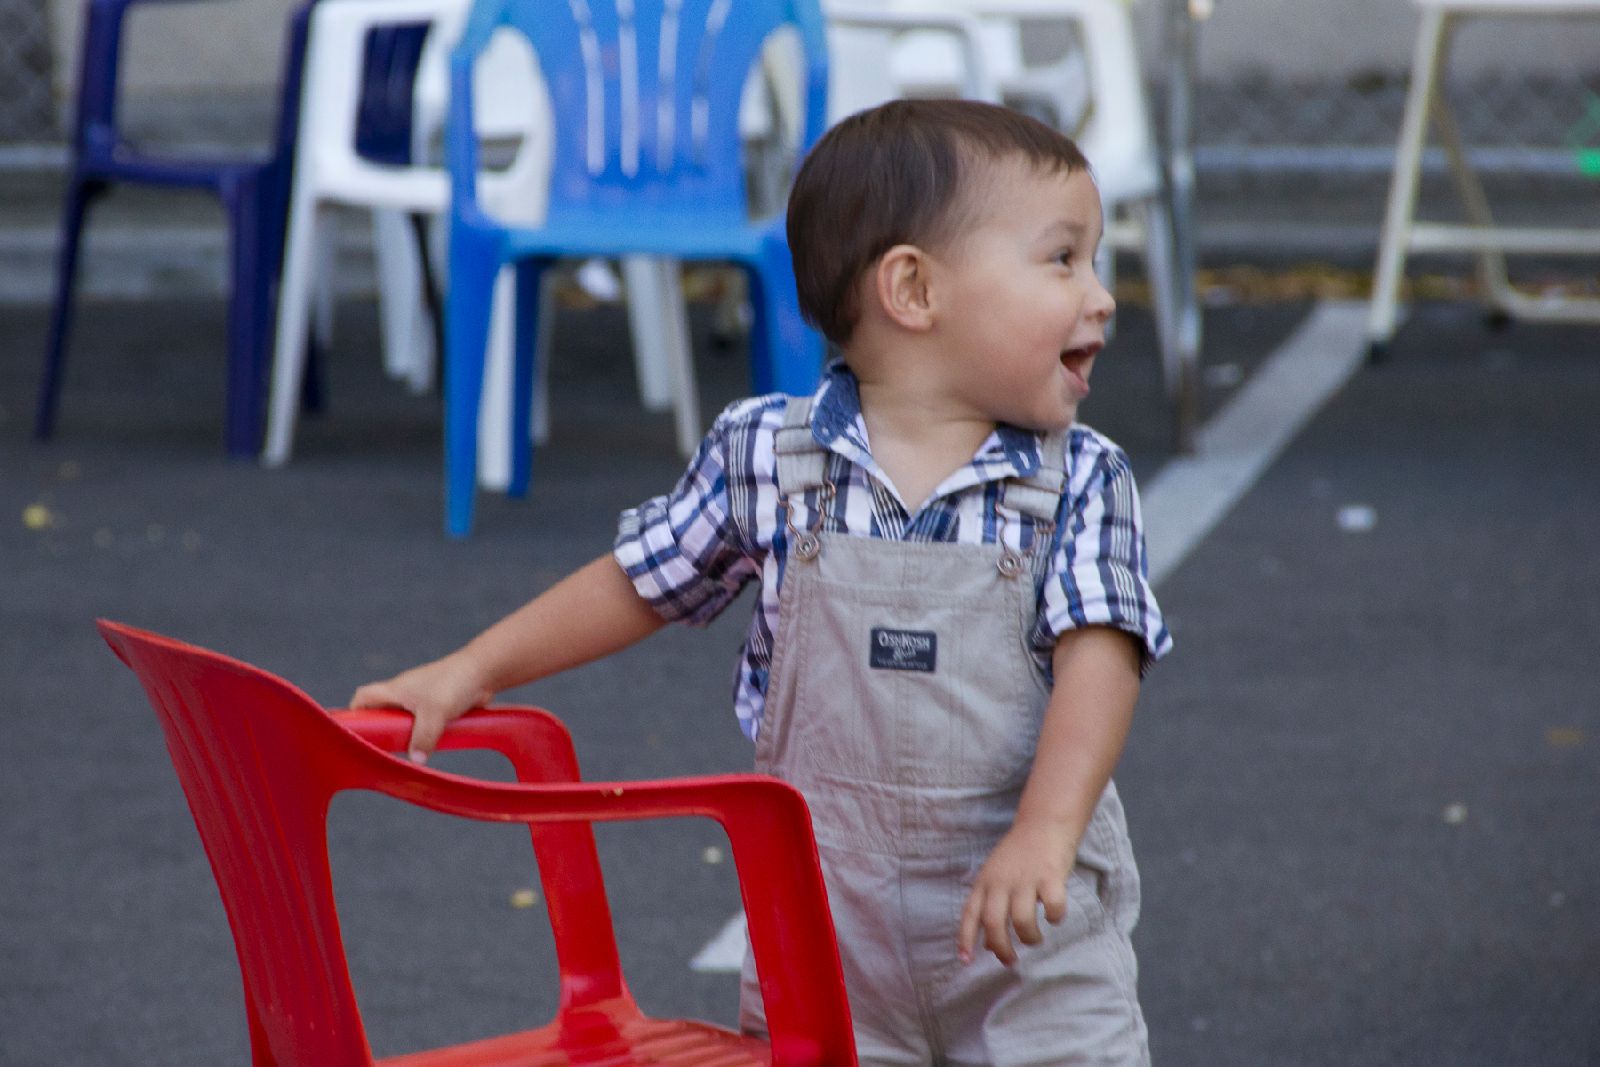 A toddler in overalls looks behind him excitedly.